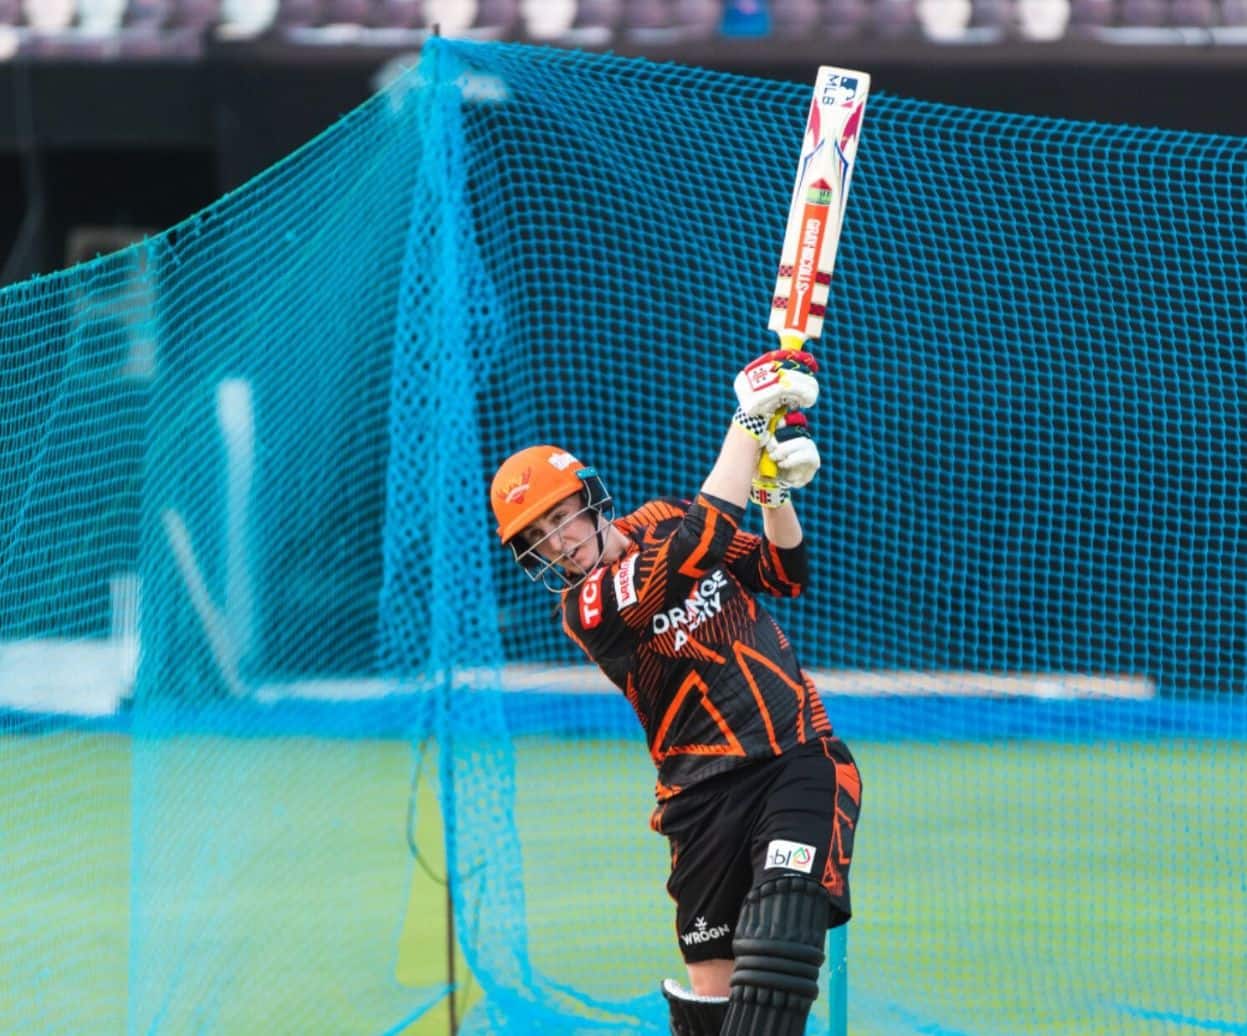 Watch: SRH's New Recruit Harry Brook 'Smash' Deliveries Out of the Ground